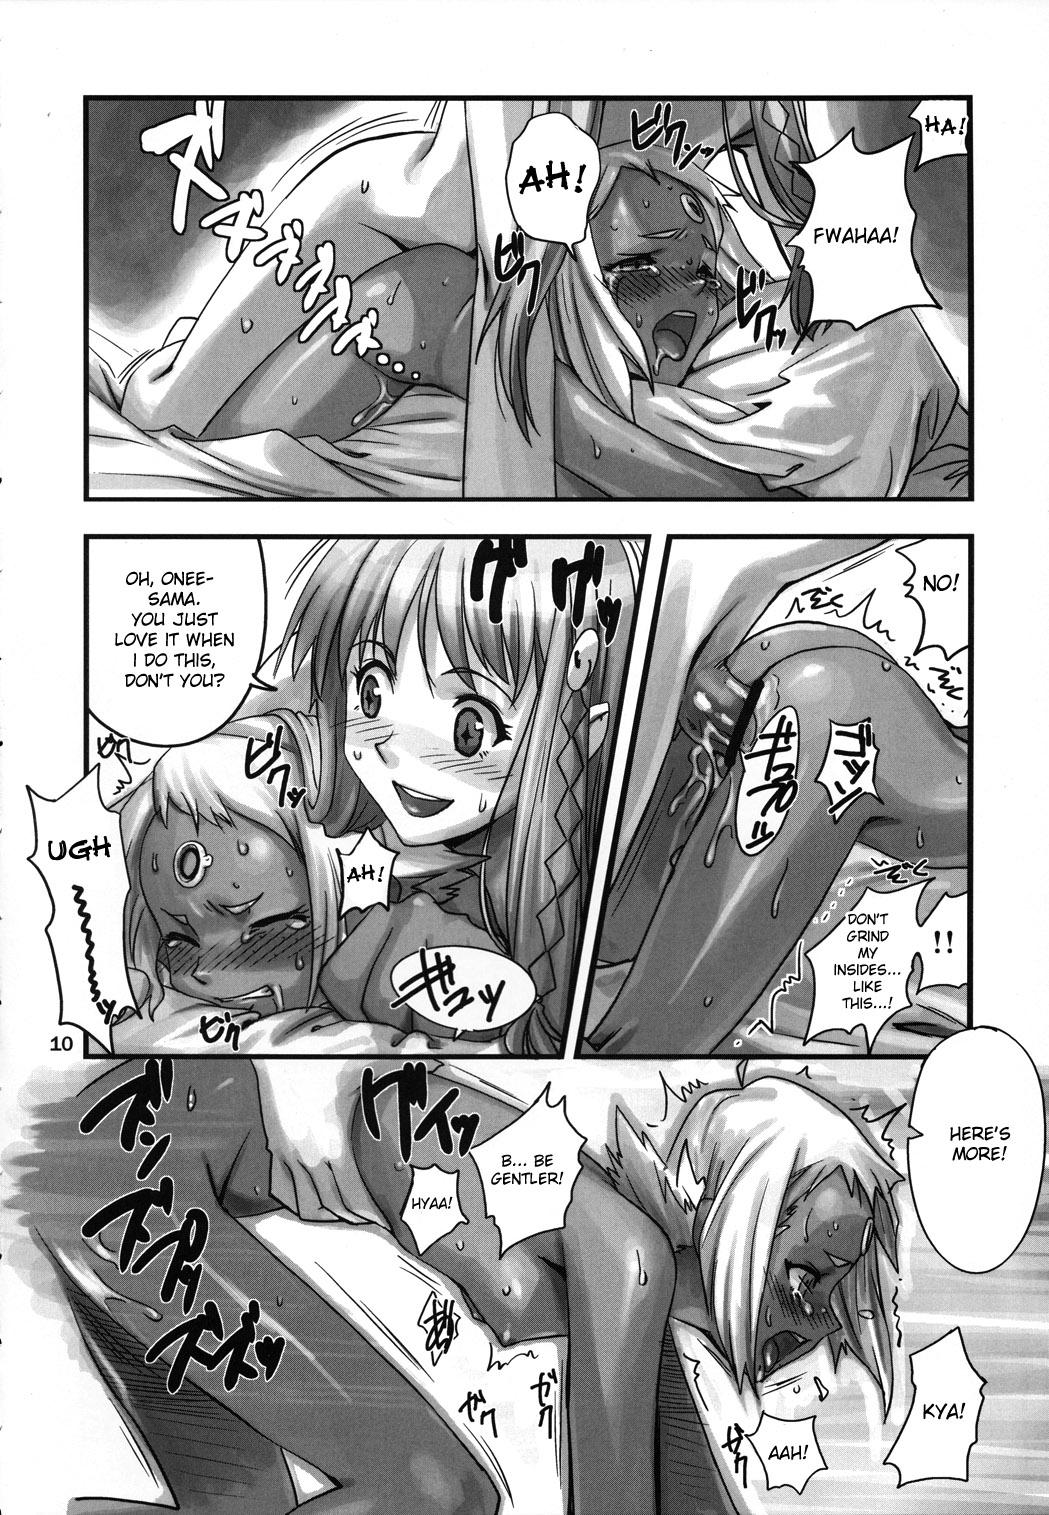 Pussy Play NonoLark! - Diebuster Famosa - Page 7